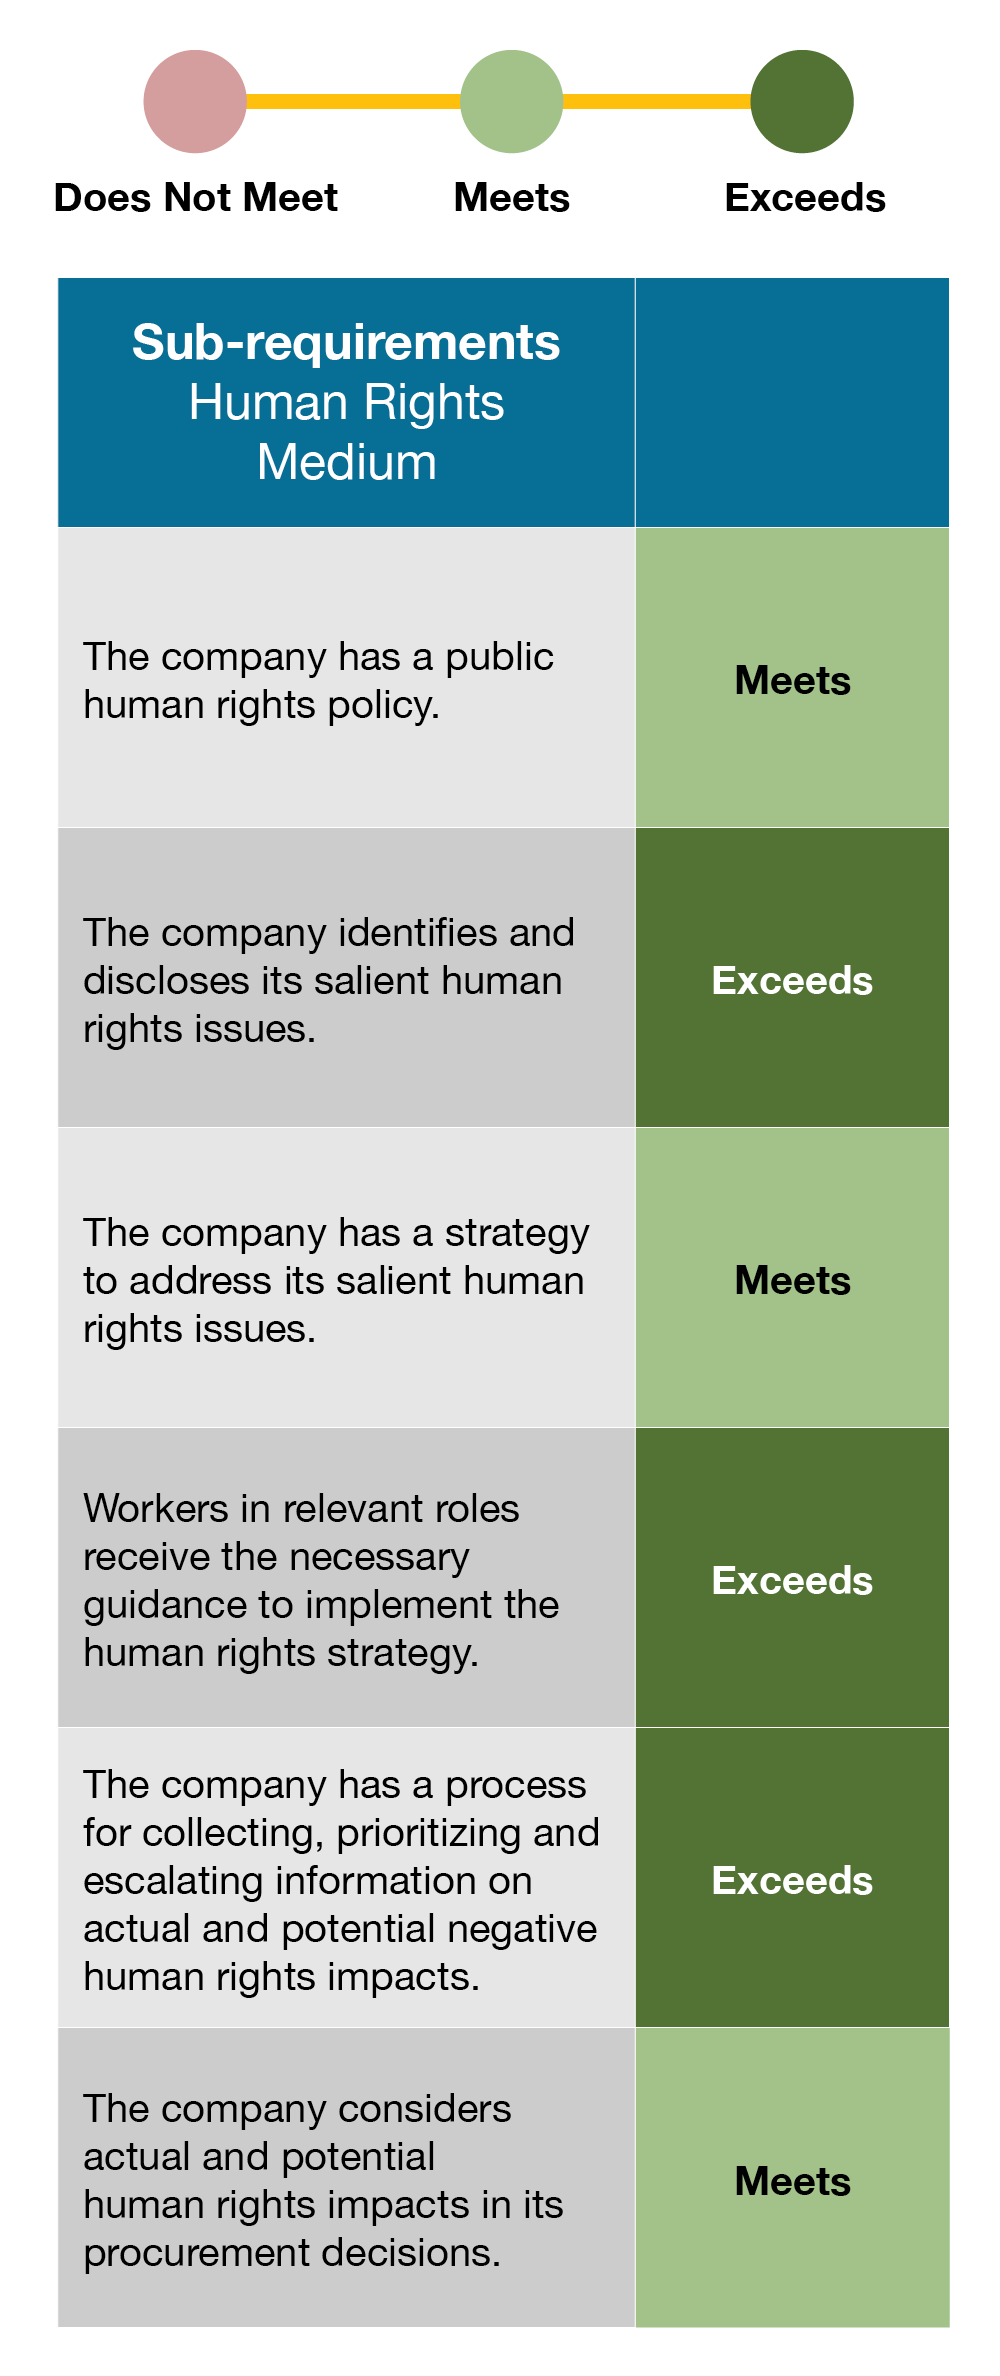 A company will be evaluated as "Does not meet", "Meets" or "Exceeds" each Impact Topic’s sub-requirements. An indicative example of what this could look like for the topic of Human Rights.